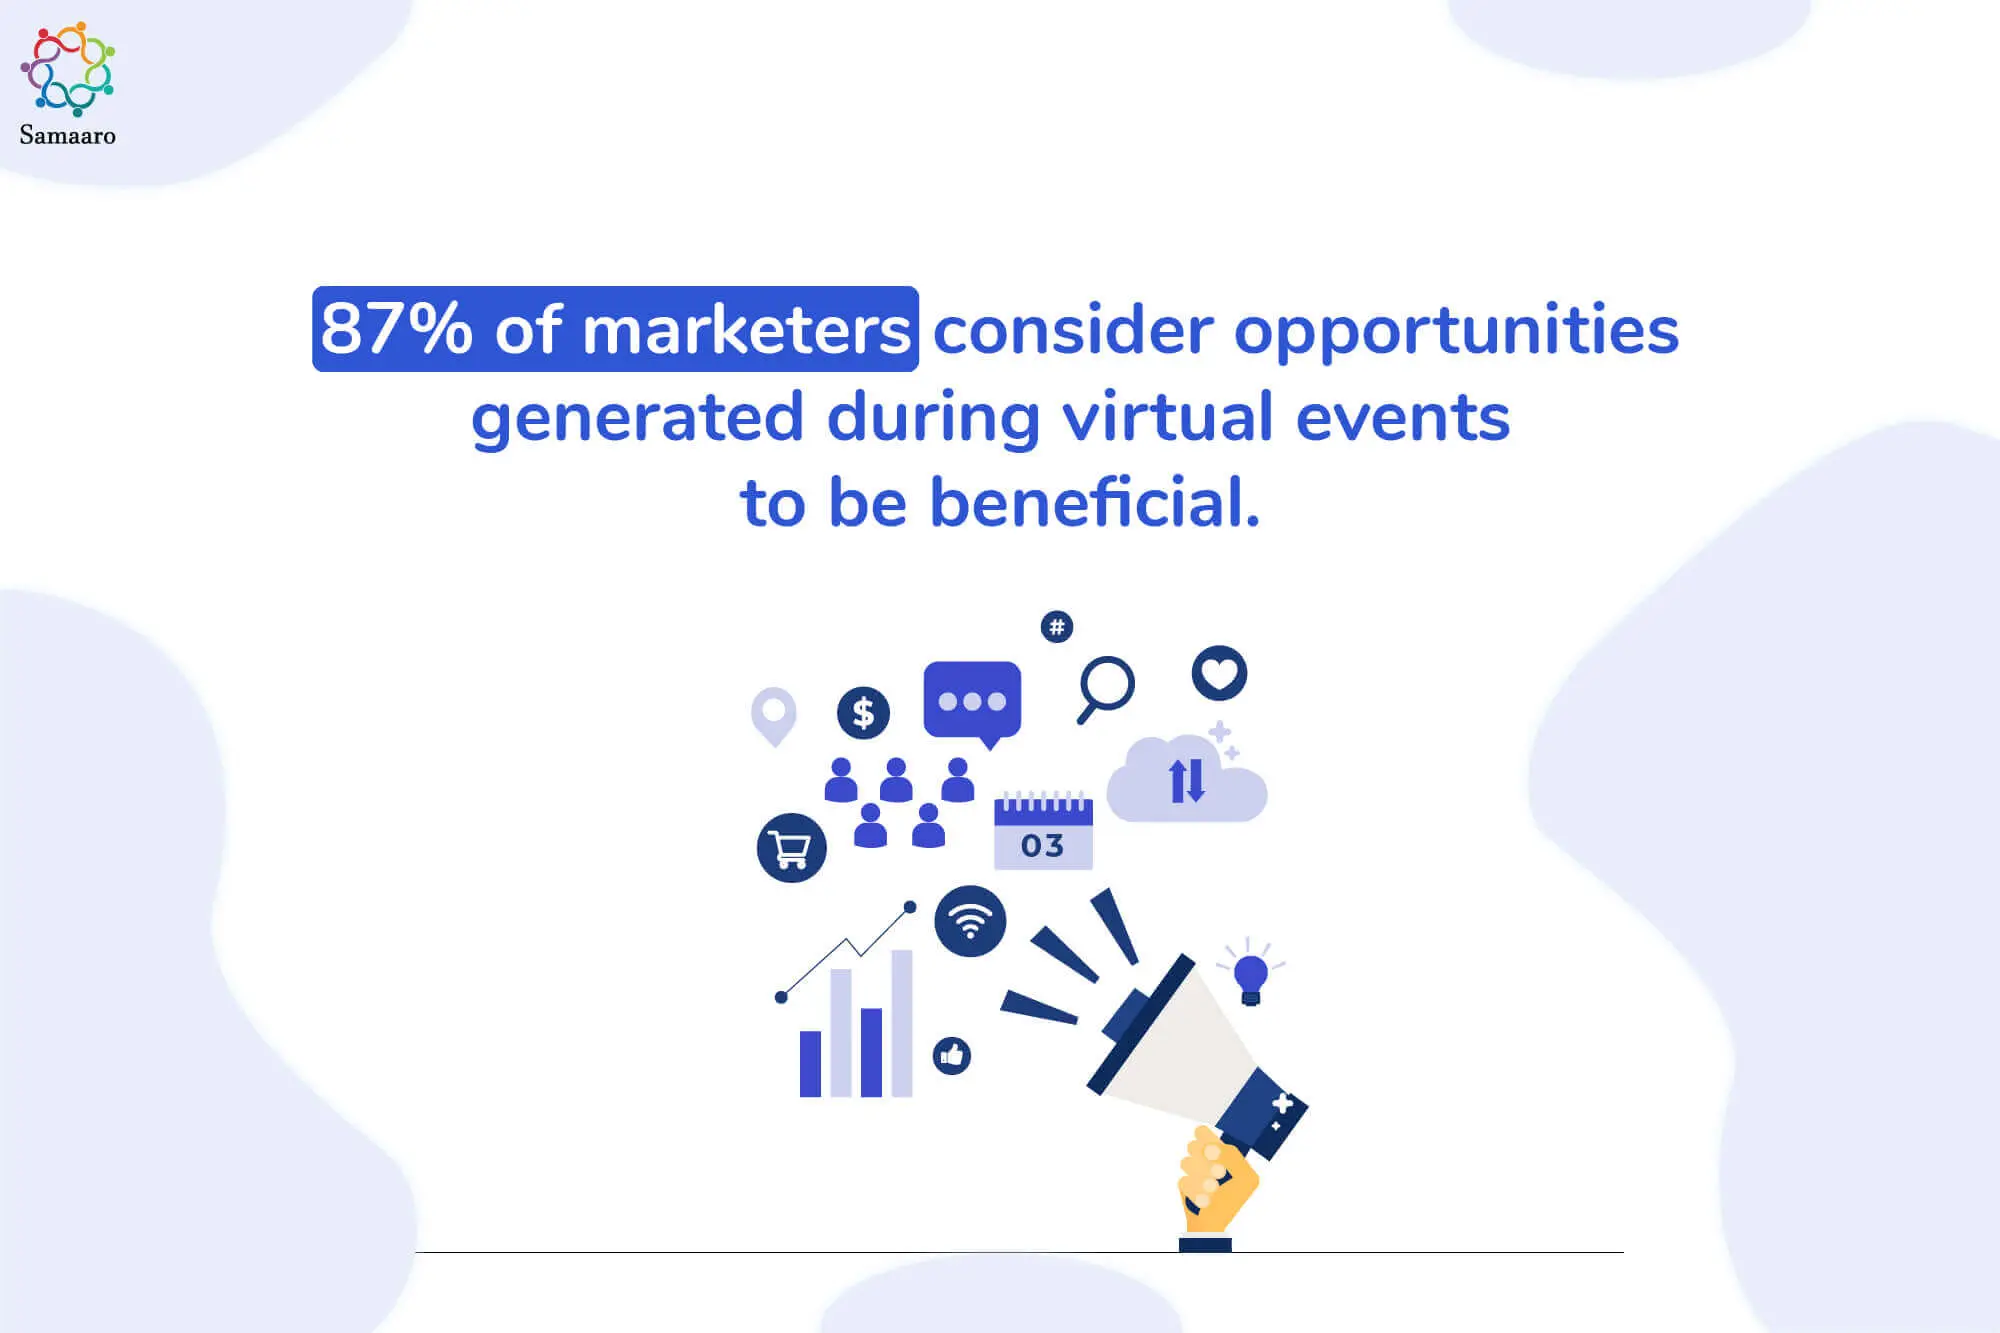 80% marketers say virtual events are beneficial